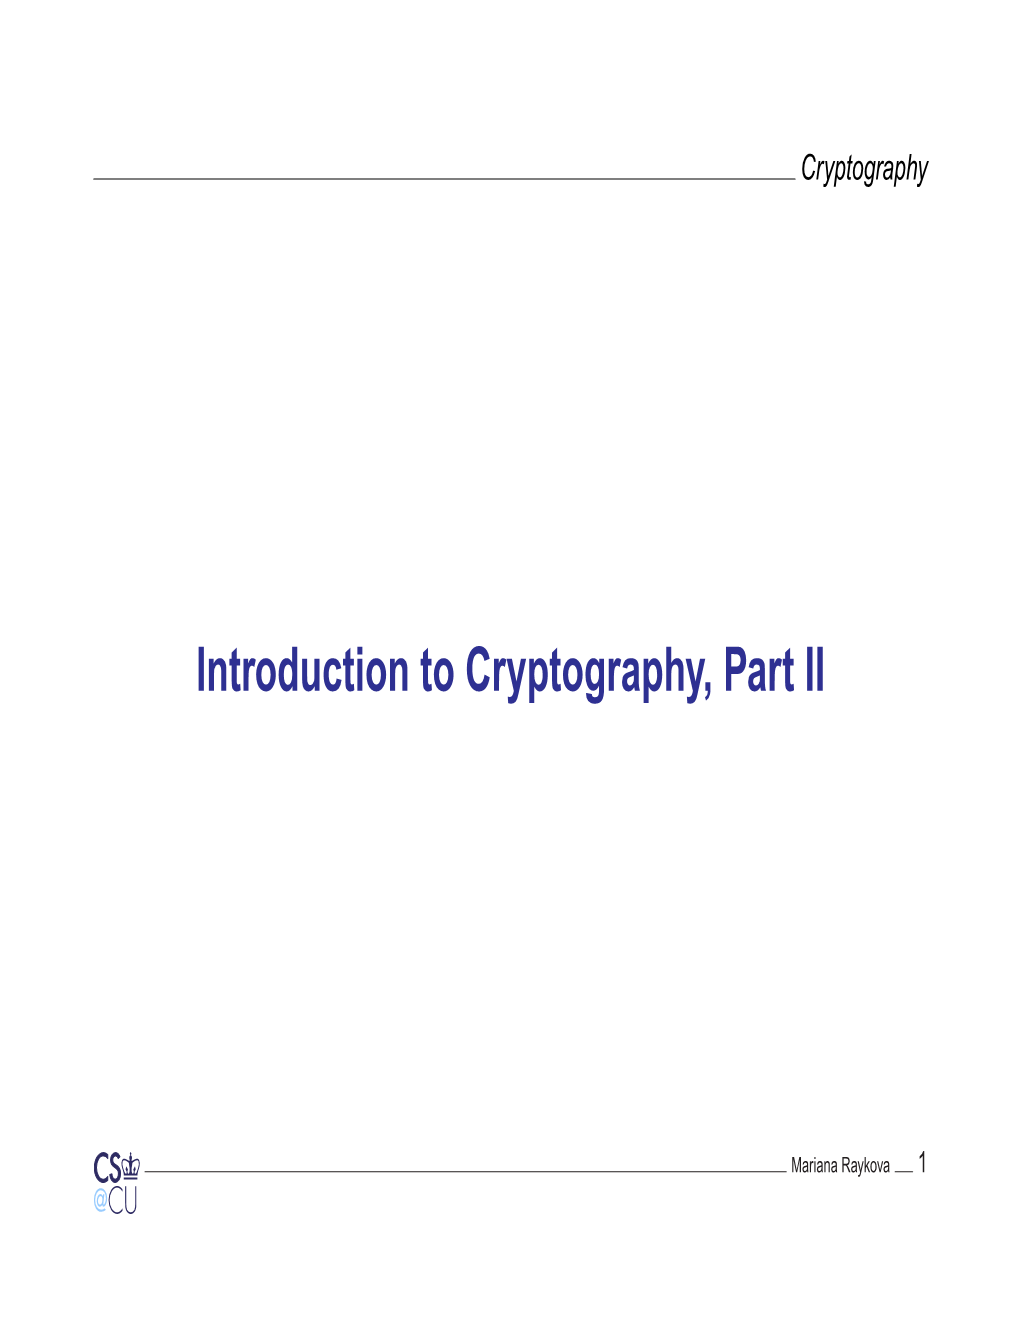 Introduction to Cryptography, Part II